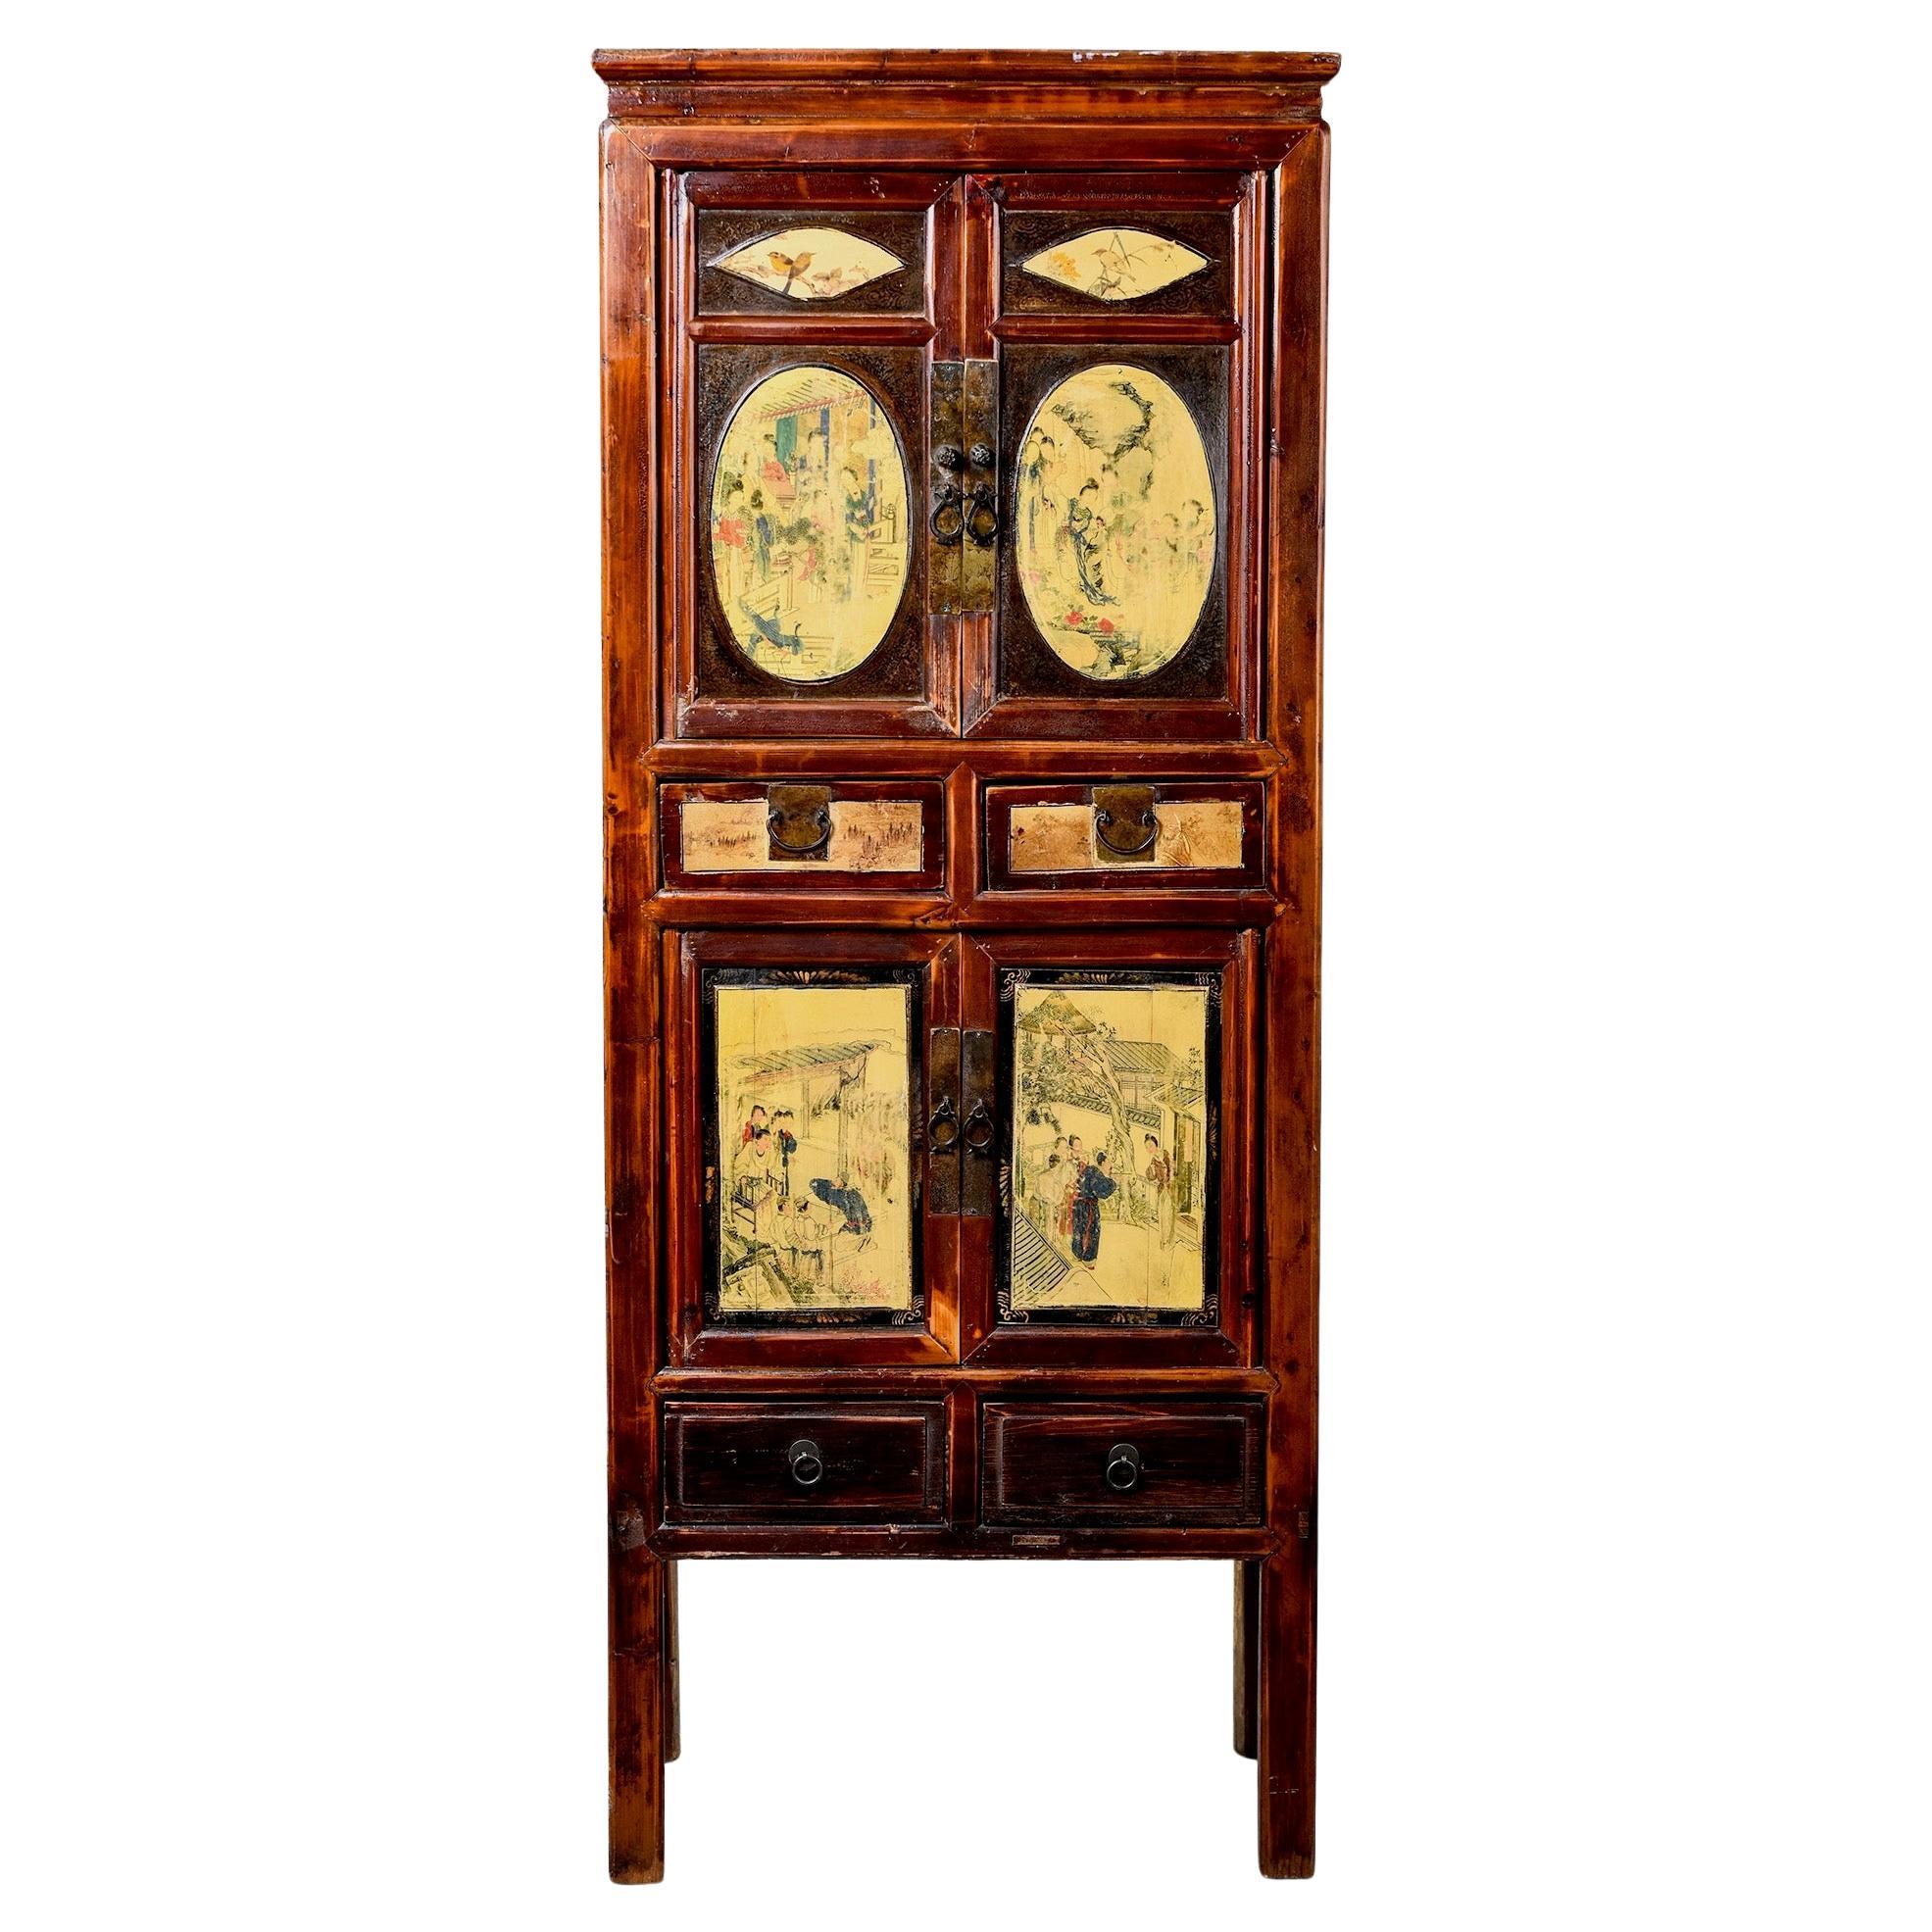 Early 20th C Tall Narrow Chinese Cabinet with Painted Opera Scenes